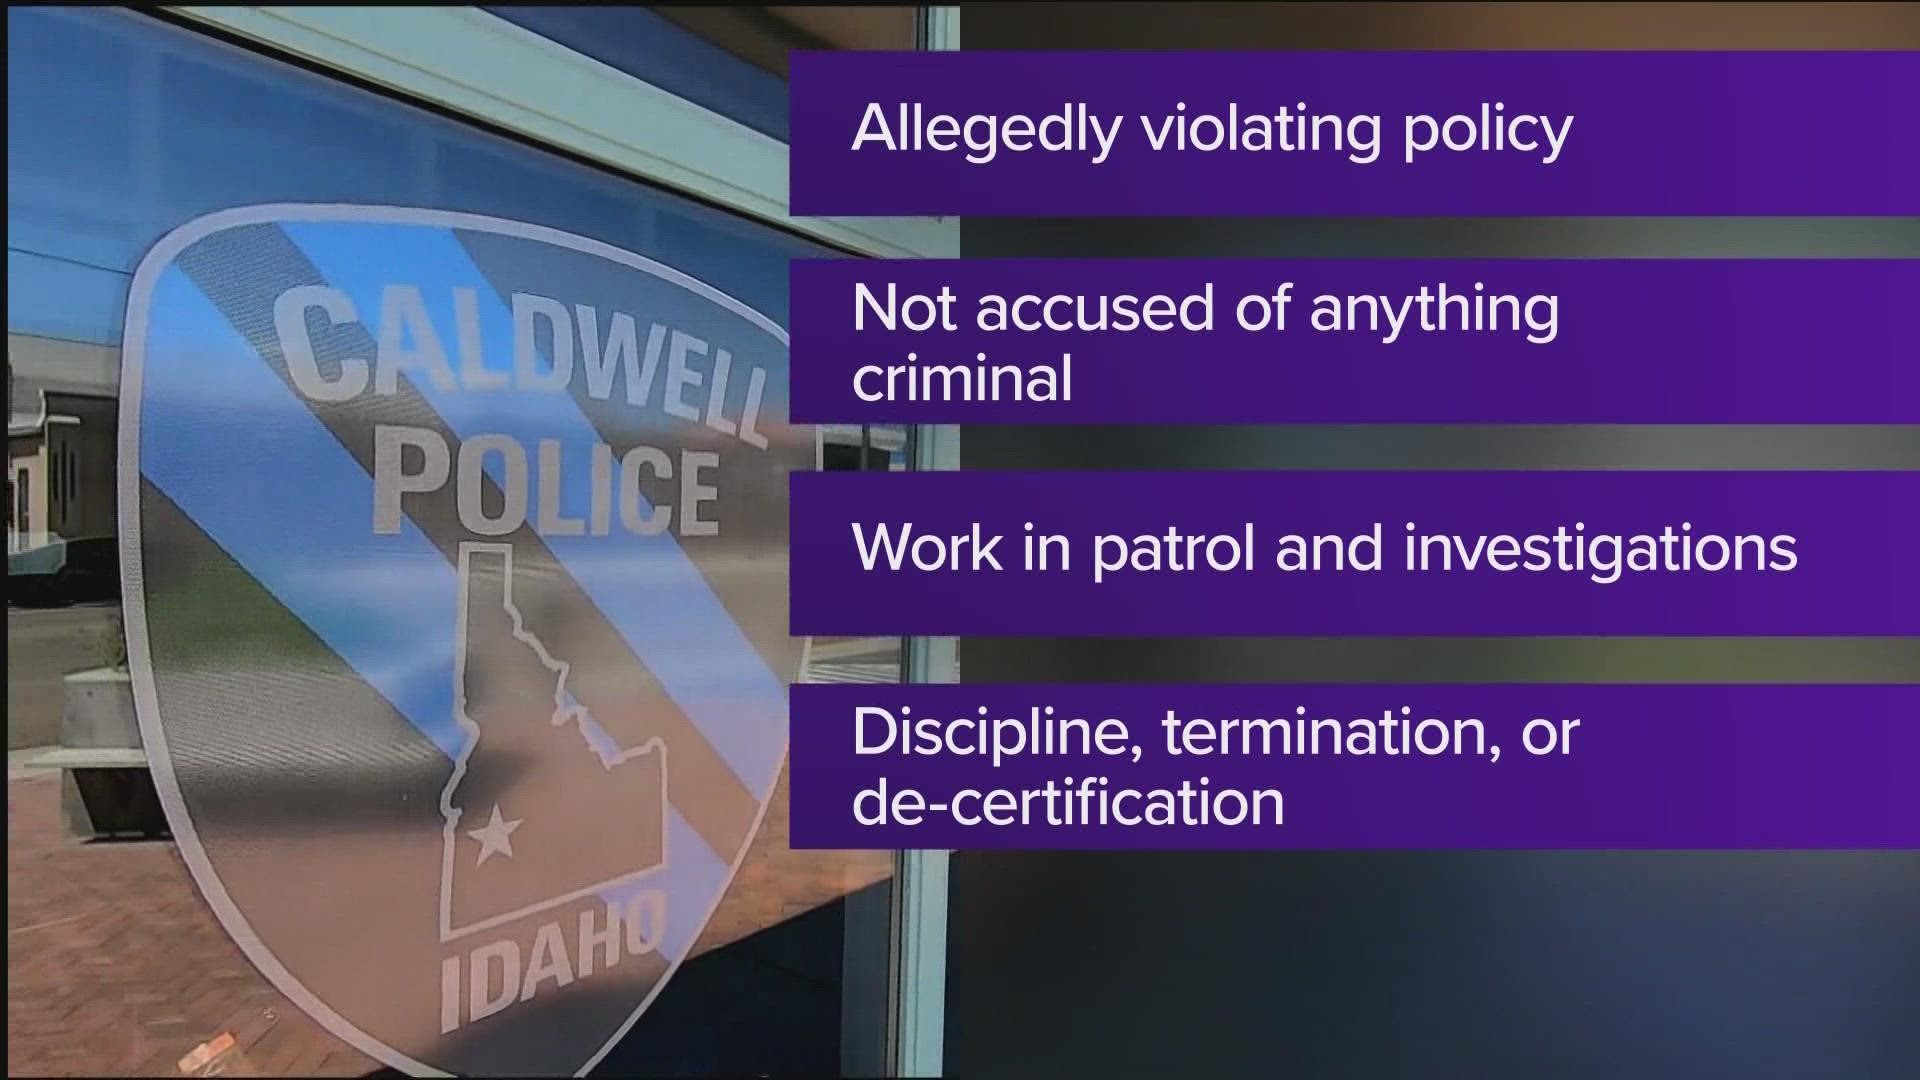 The individuals are being investigated for allegedly violating policy but are not accused of criminal conduct, Caldwell Police Chief Rex Ingram told KTVB.